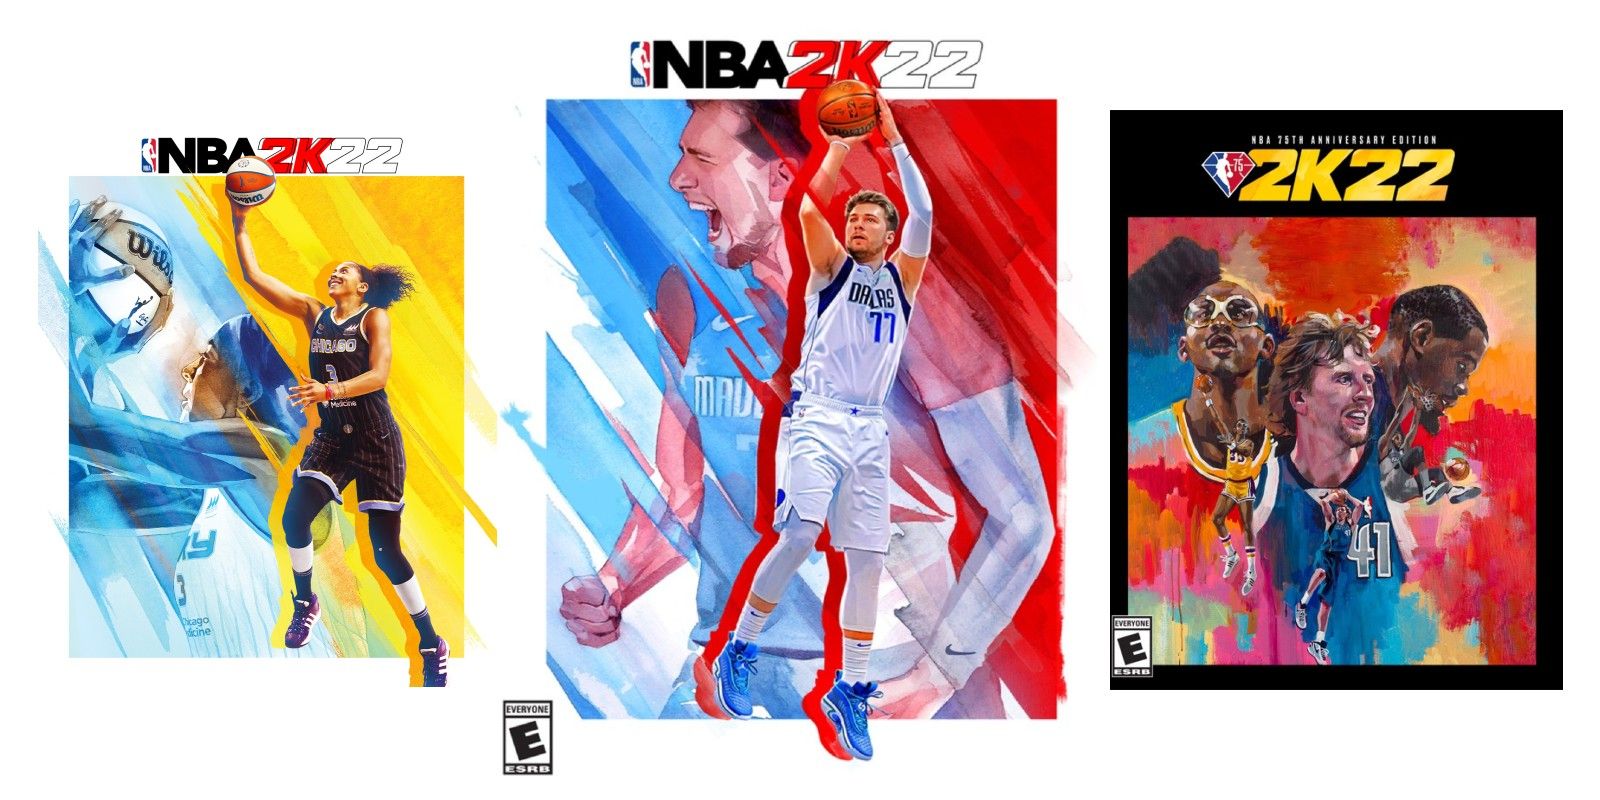 NBA 2K22 Reveals Candace Parker Luka Doncic As Cover Athletes